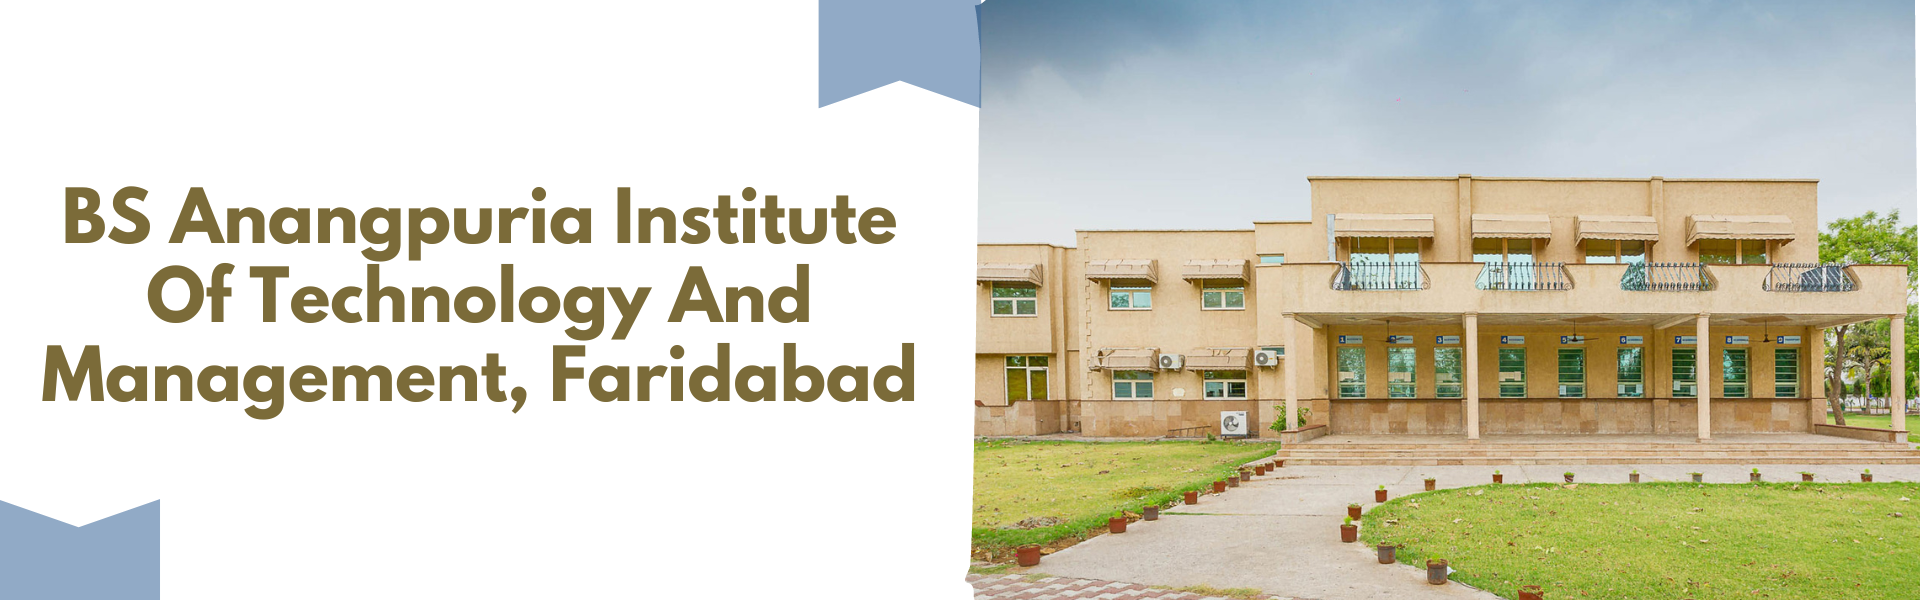 BS Anangpuria Institute Of Technology And Management, Faridabad